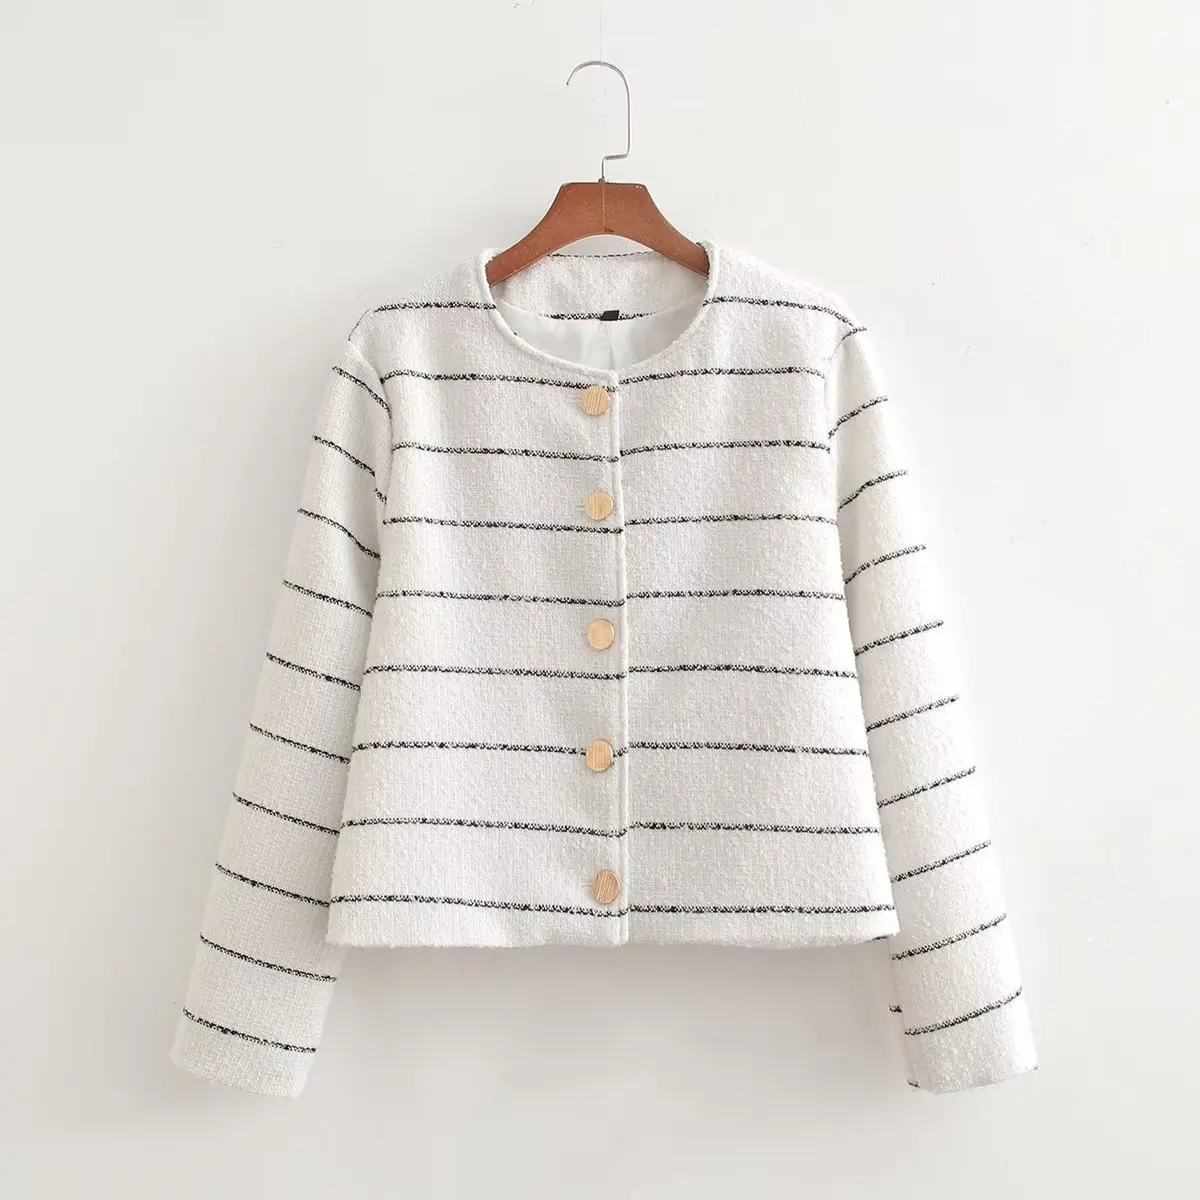 Women Jacket Elegant Office Lady Bussiness High Quality Golden Buttons Pockets Simple Black Stripes Comfortable Soft S-L